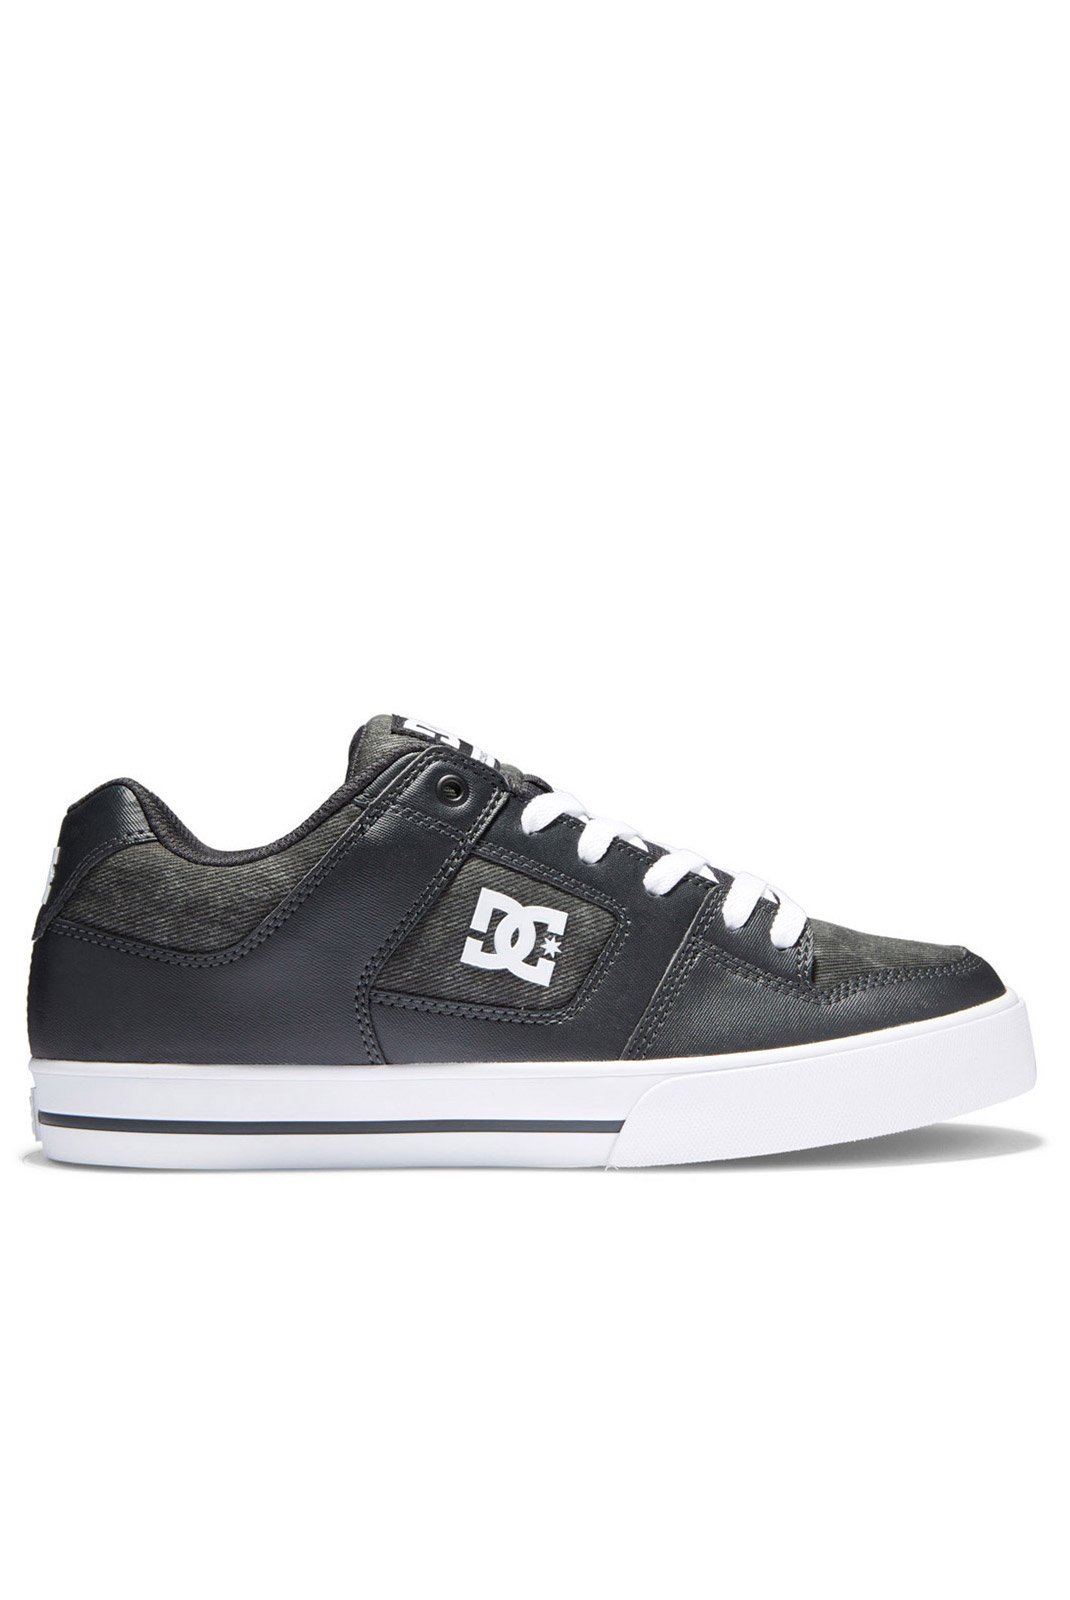 Sneakers / Sport  Dc shoes ADYS100747 KDW